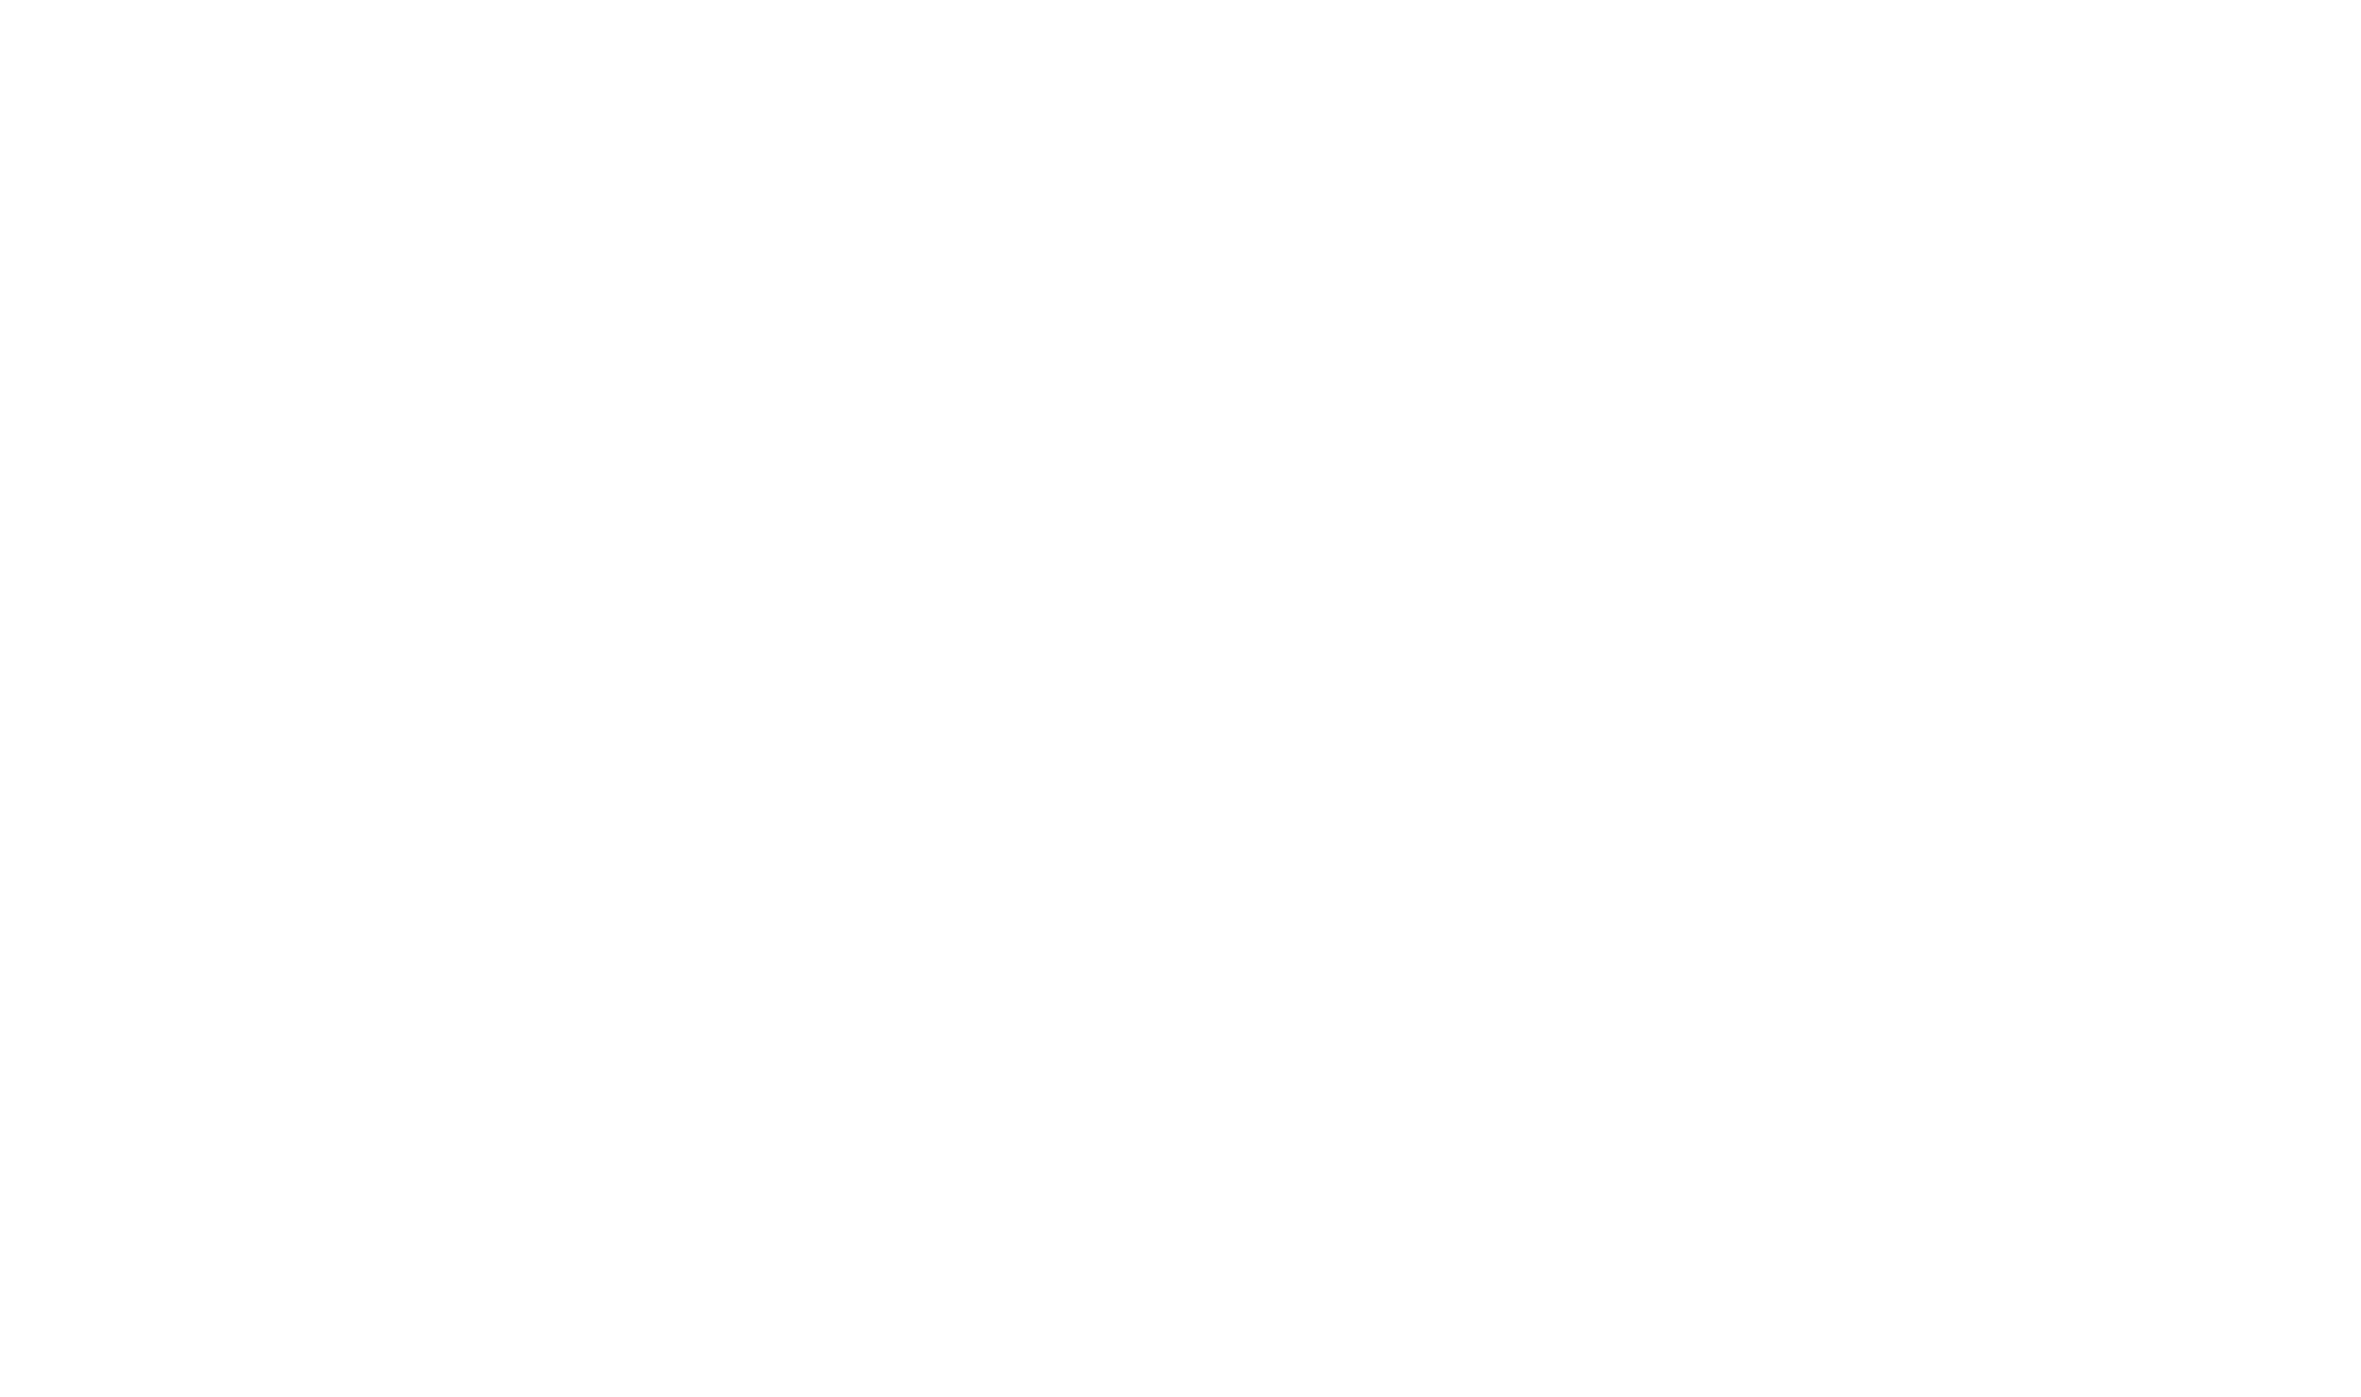 VeData Group